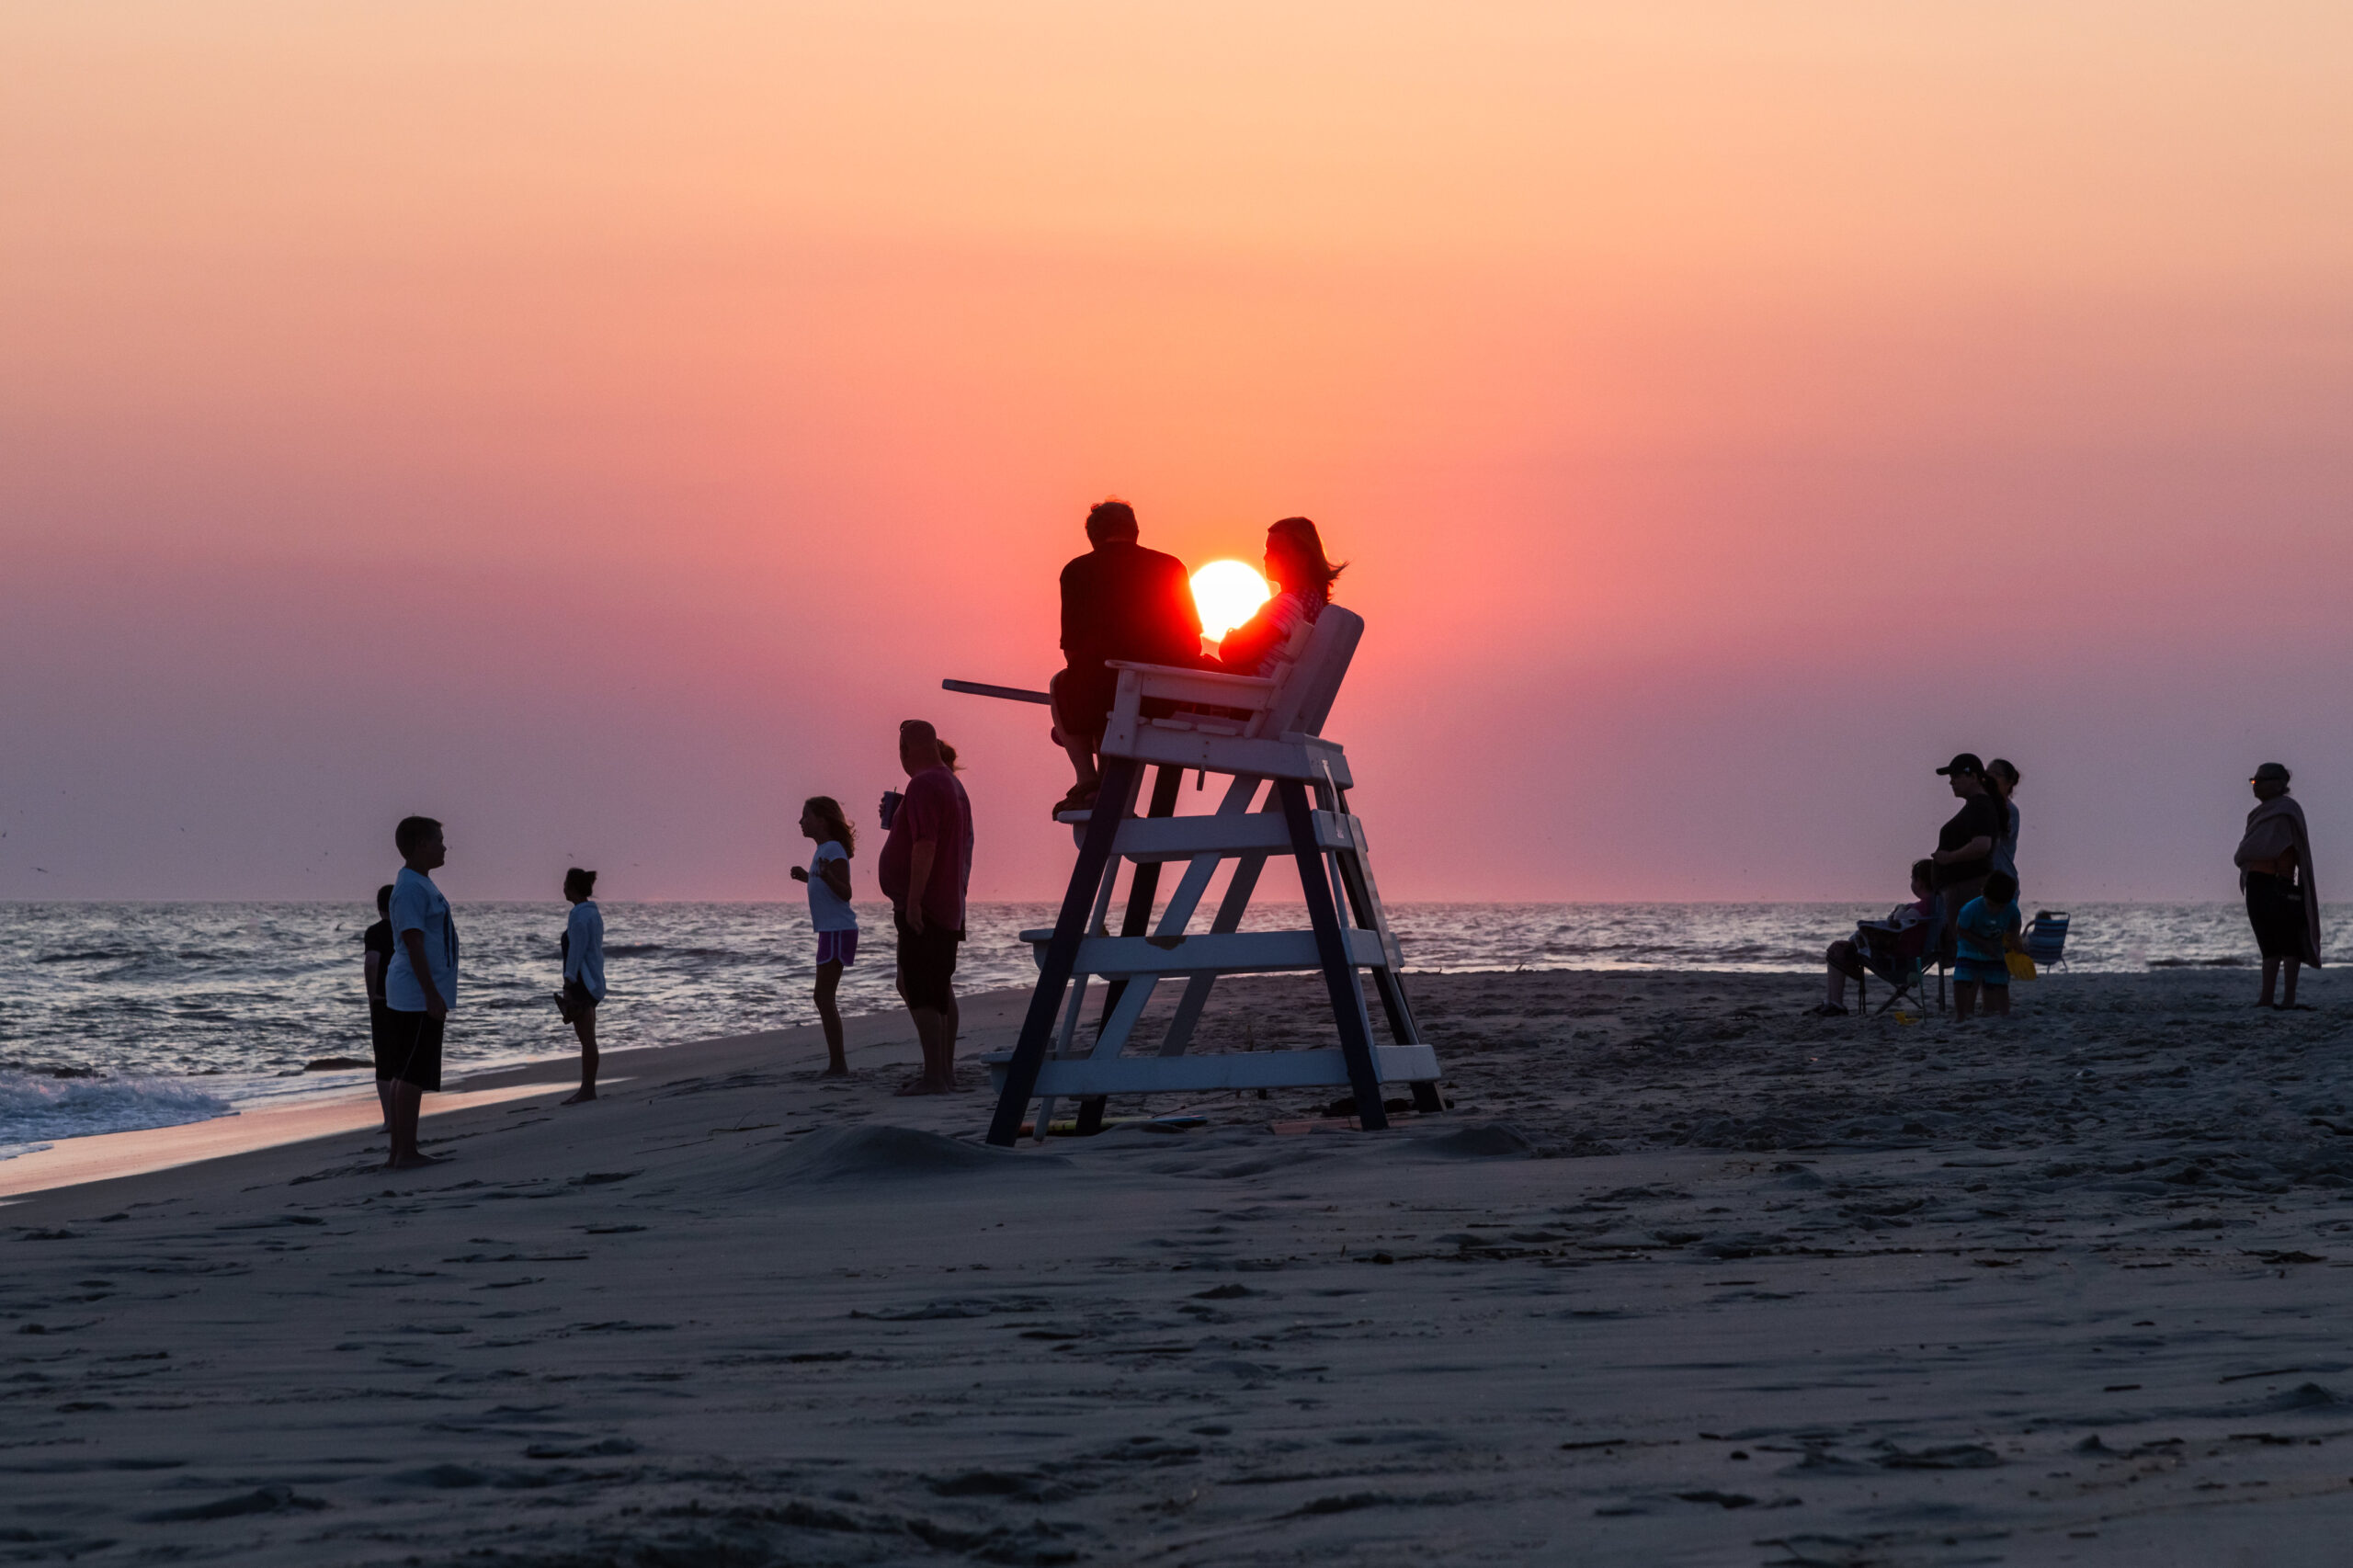 The sun setting behind people sitting on a lifeguard stand and people standing at the ocean